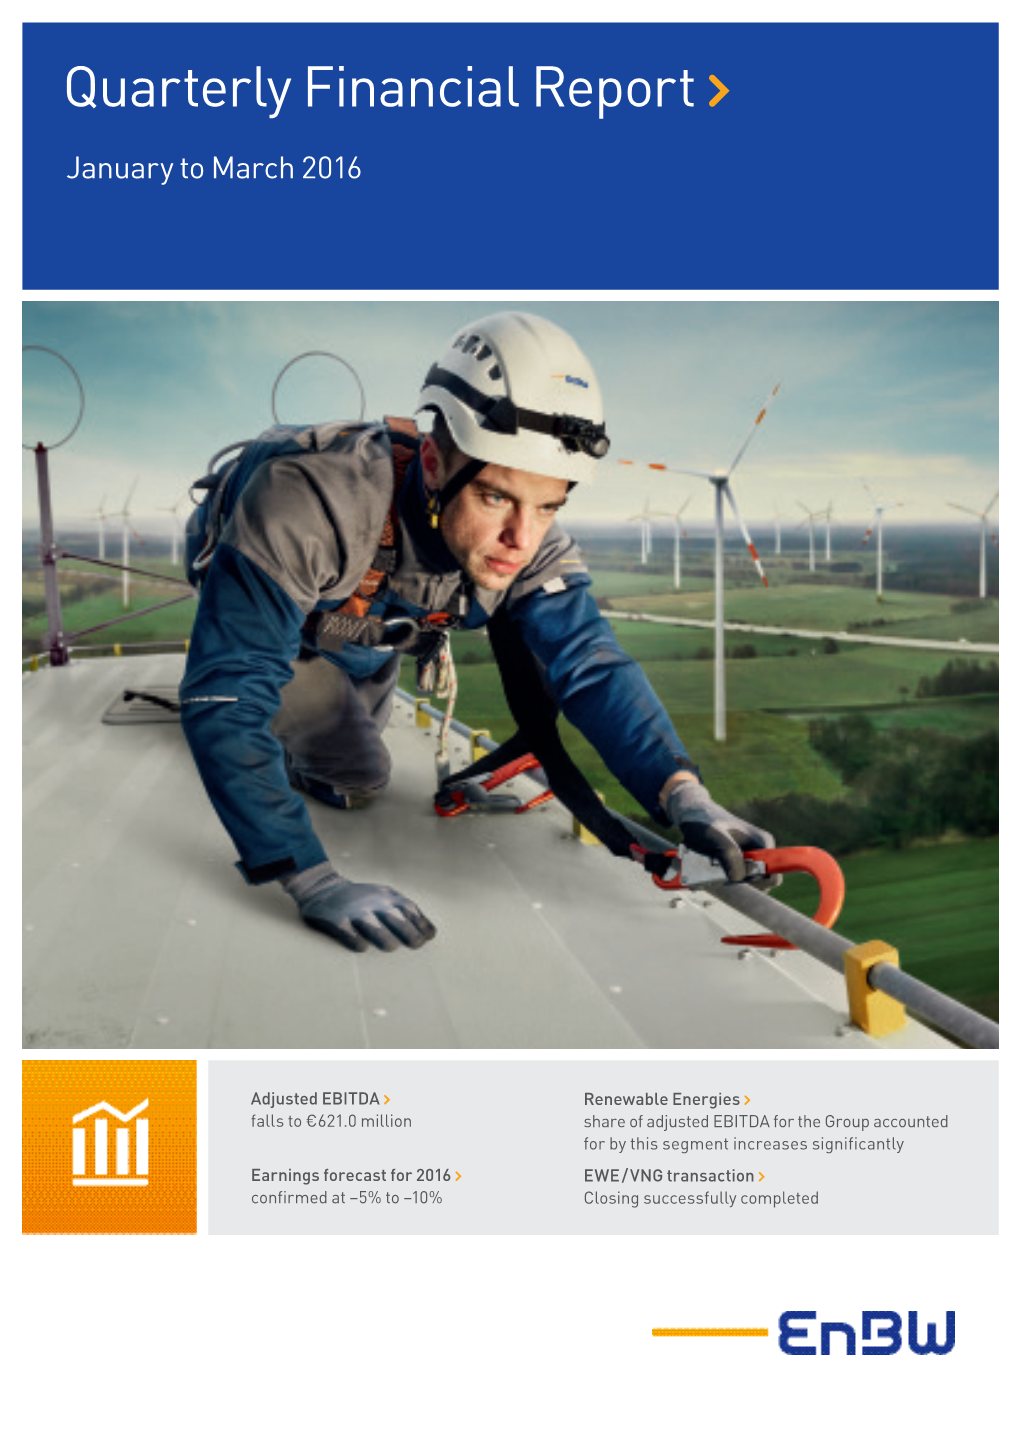 Enbw Quarterly Financial Report January to March 2016